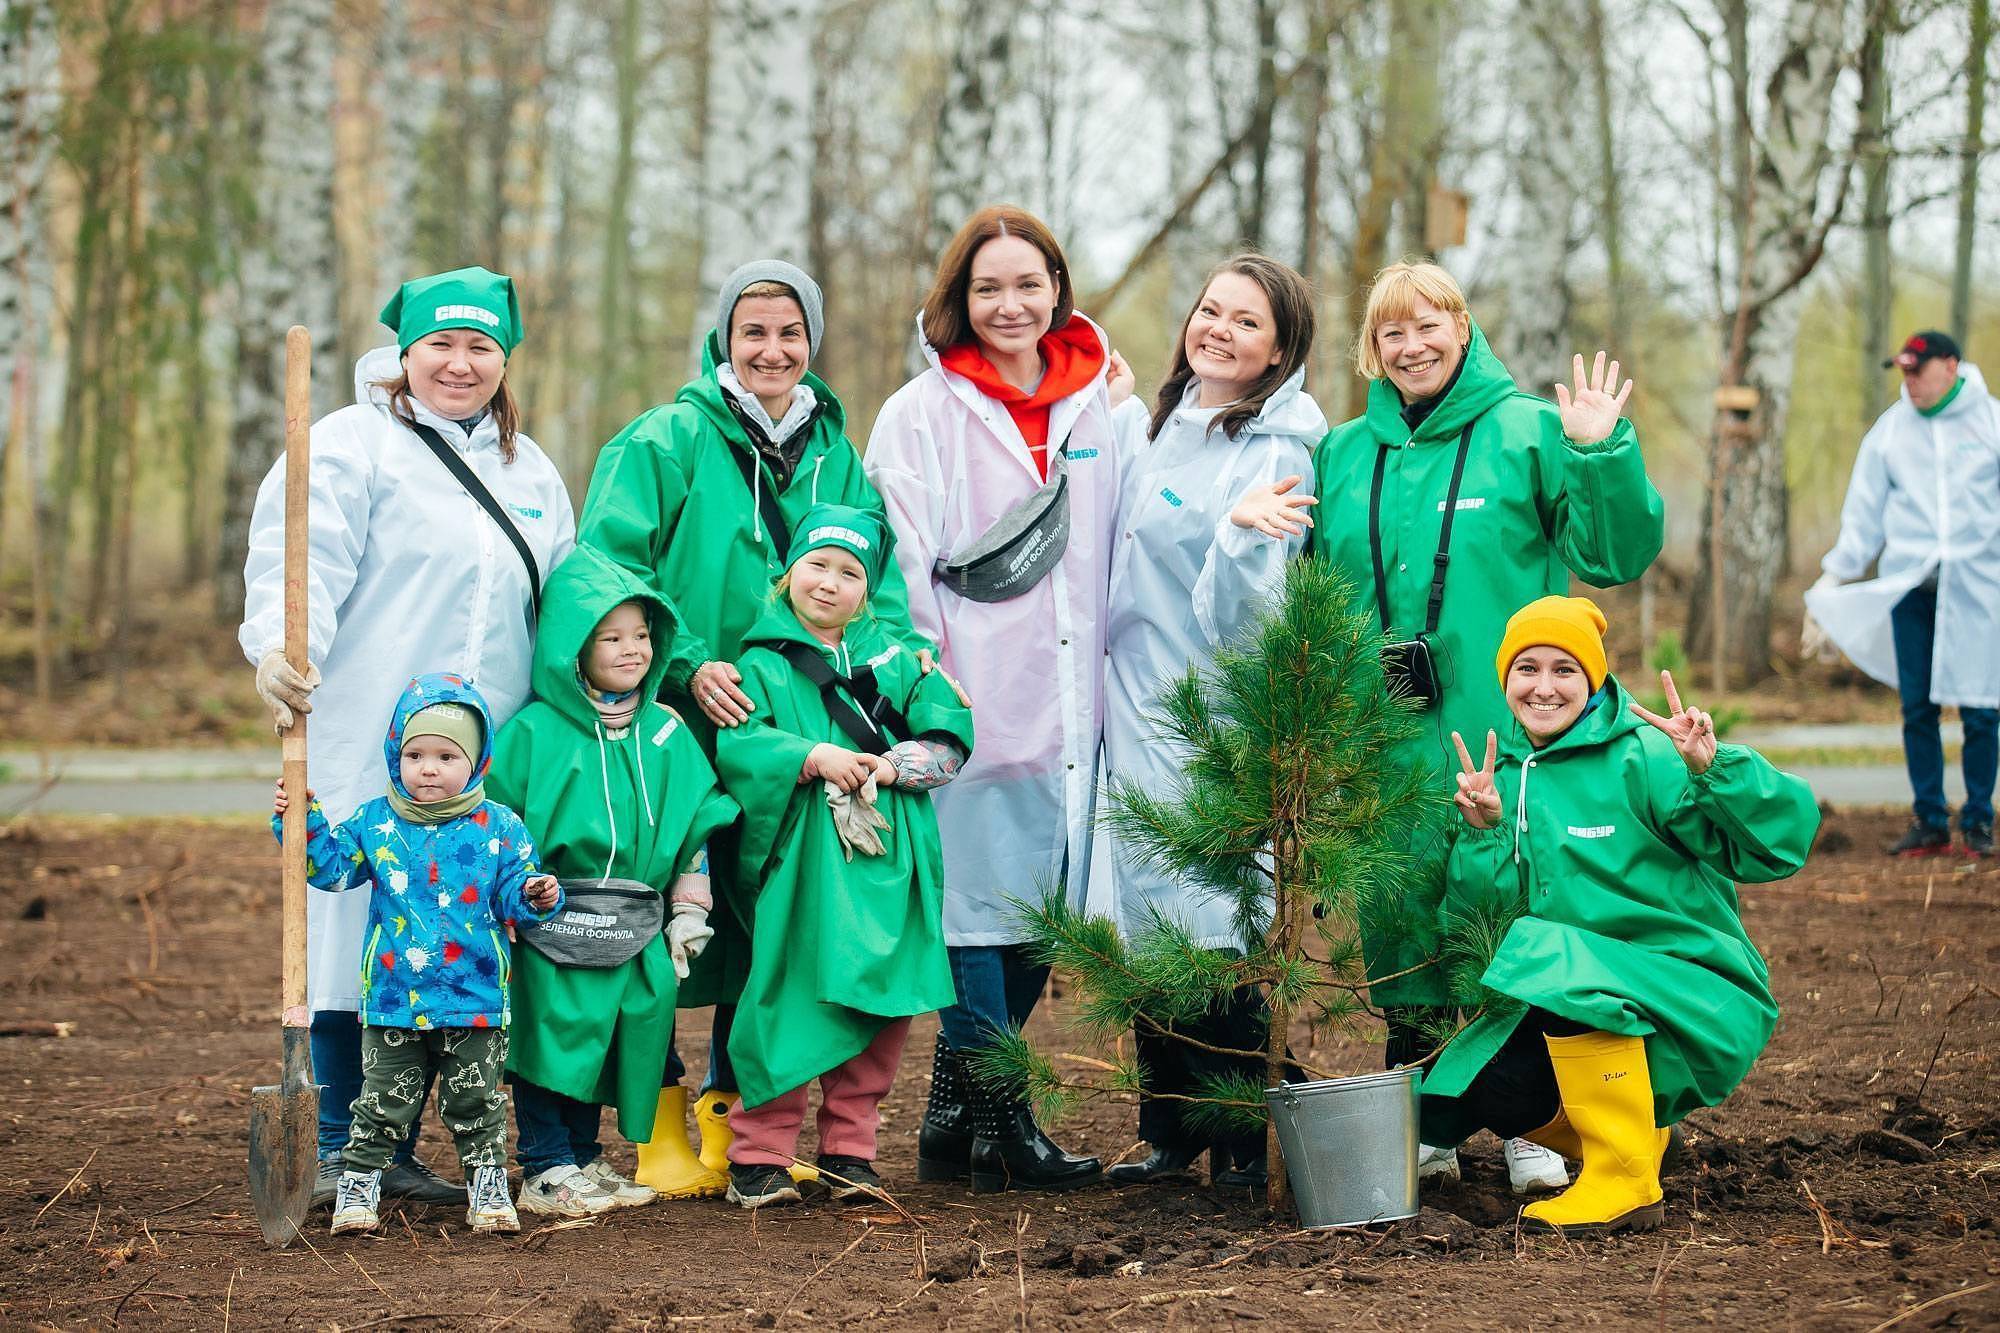 In just two years, SIBUR has planted more than half a million saplings in the Nizhnekamsk District